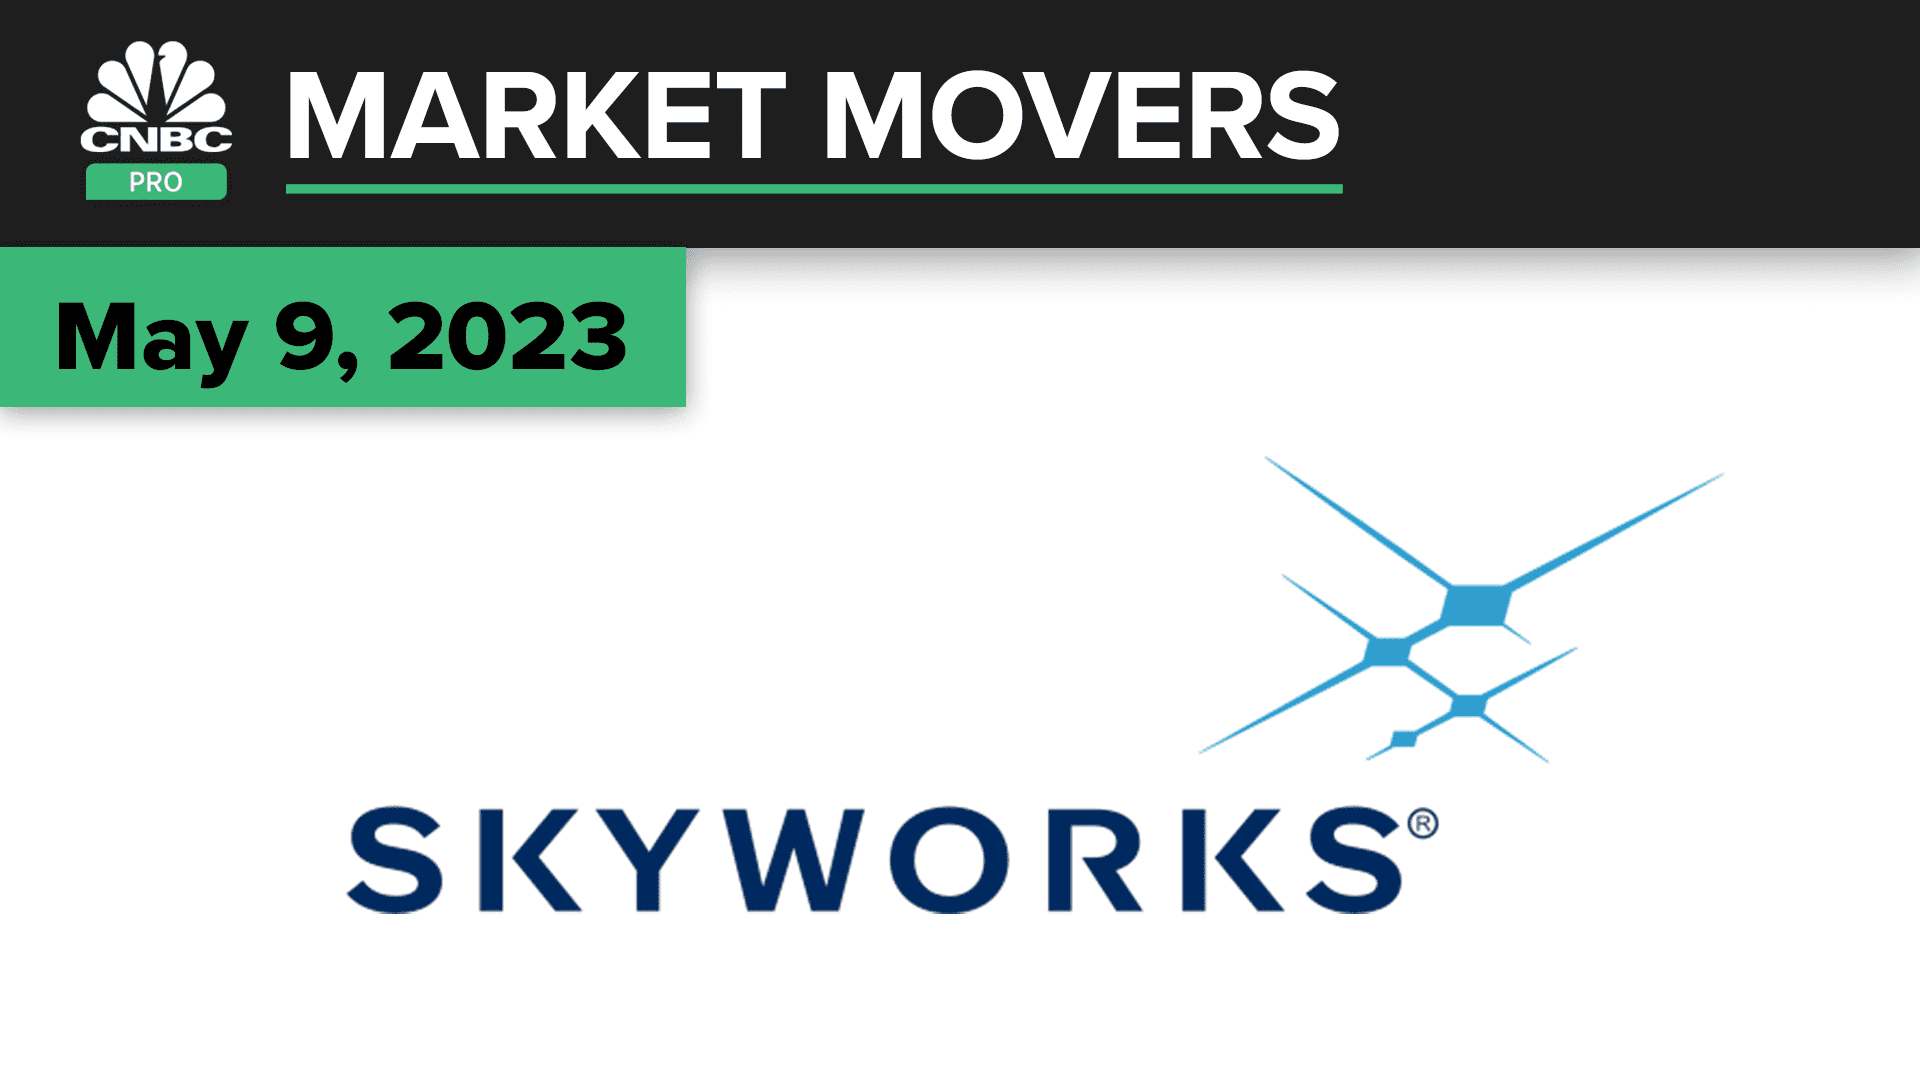 Skyworks Solutions falls after disappointing forecast. Here's what the experts say to do next